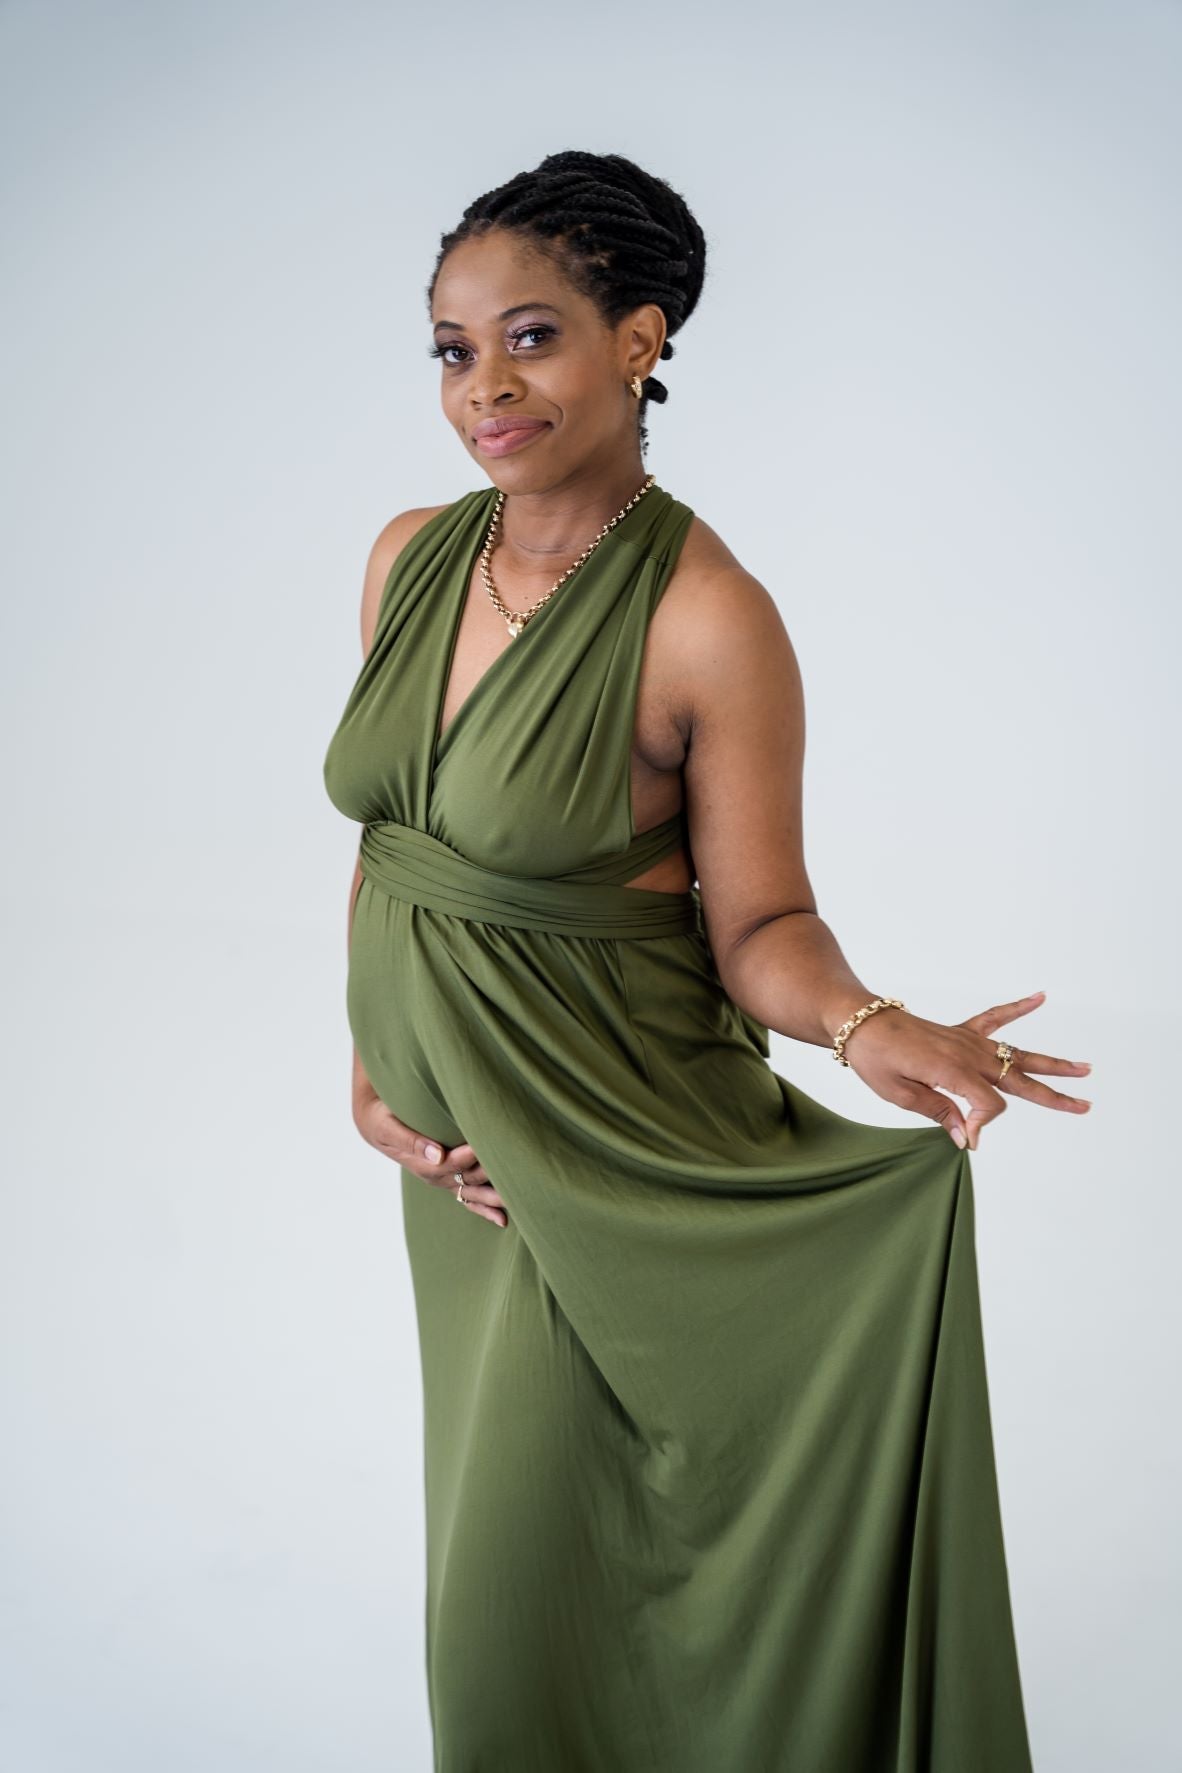 Maternity Photoshoot Dresses - Flexy - Army Green Dress - 4 DAY RENTAL - Luxe Bumps AU